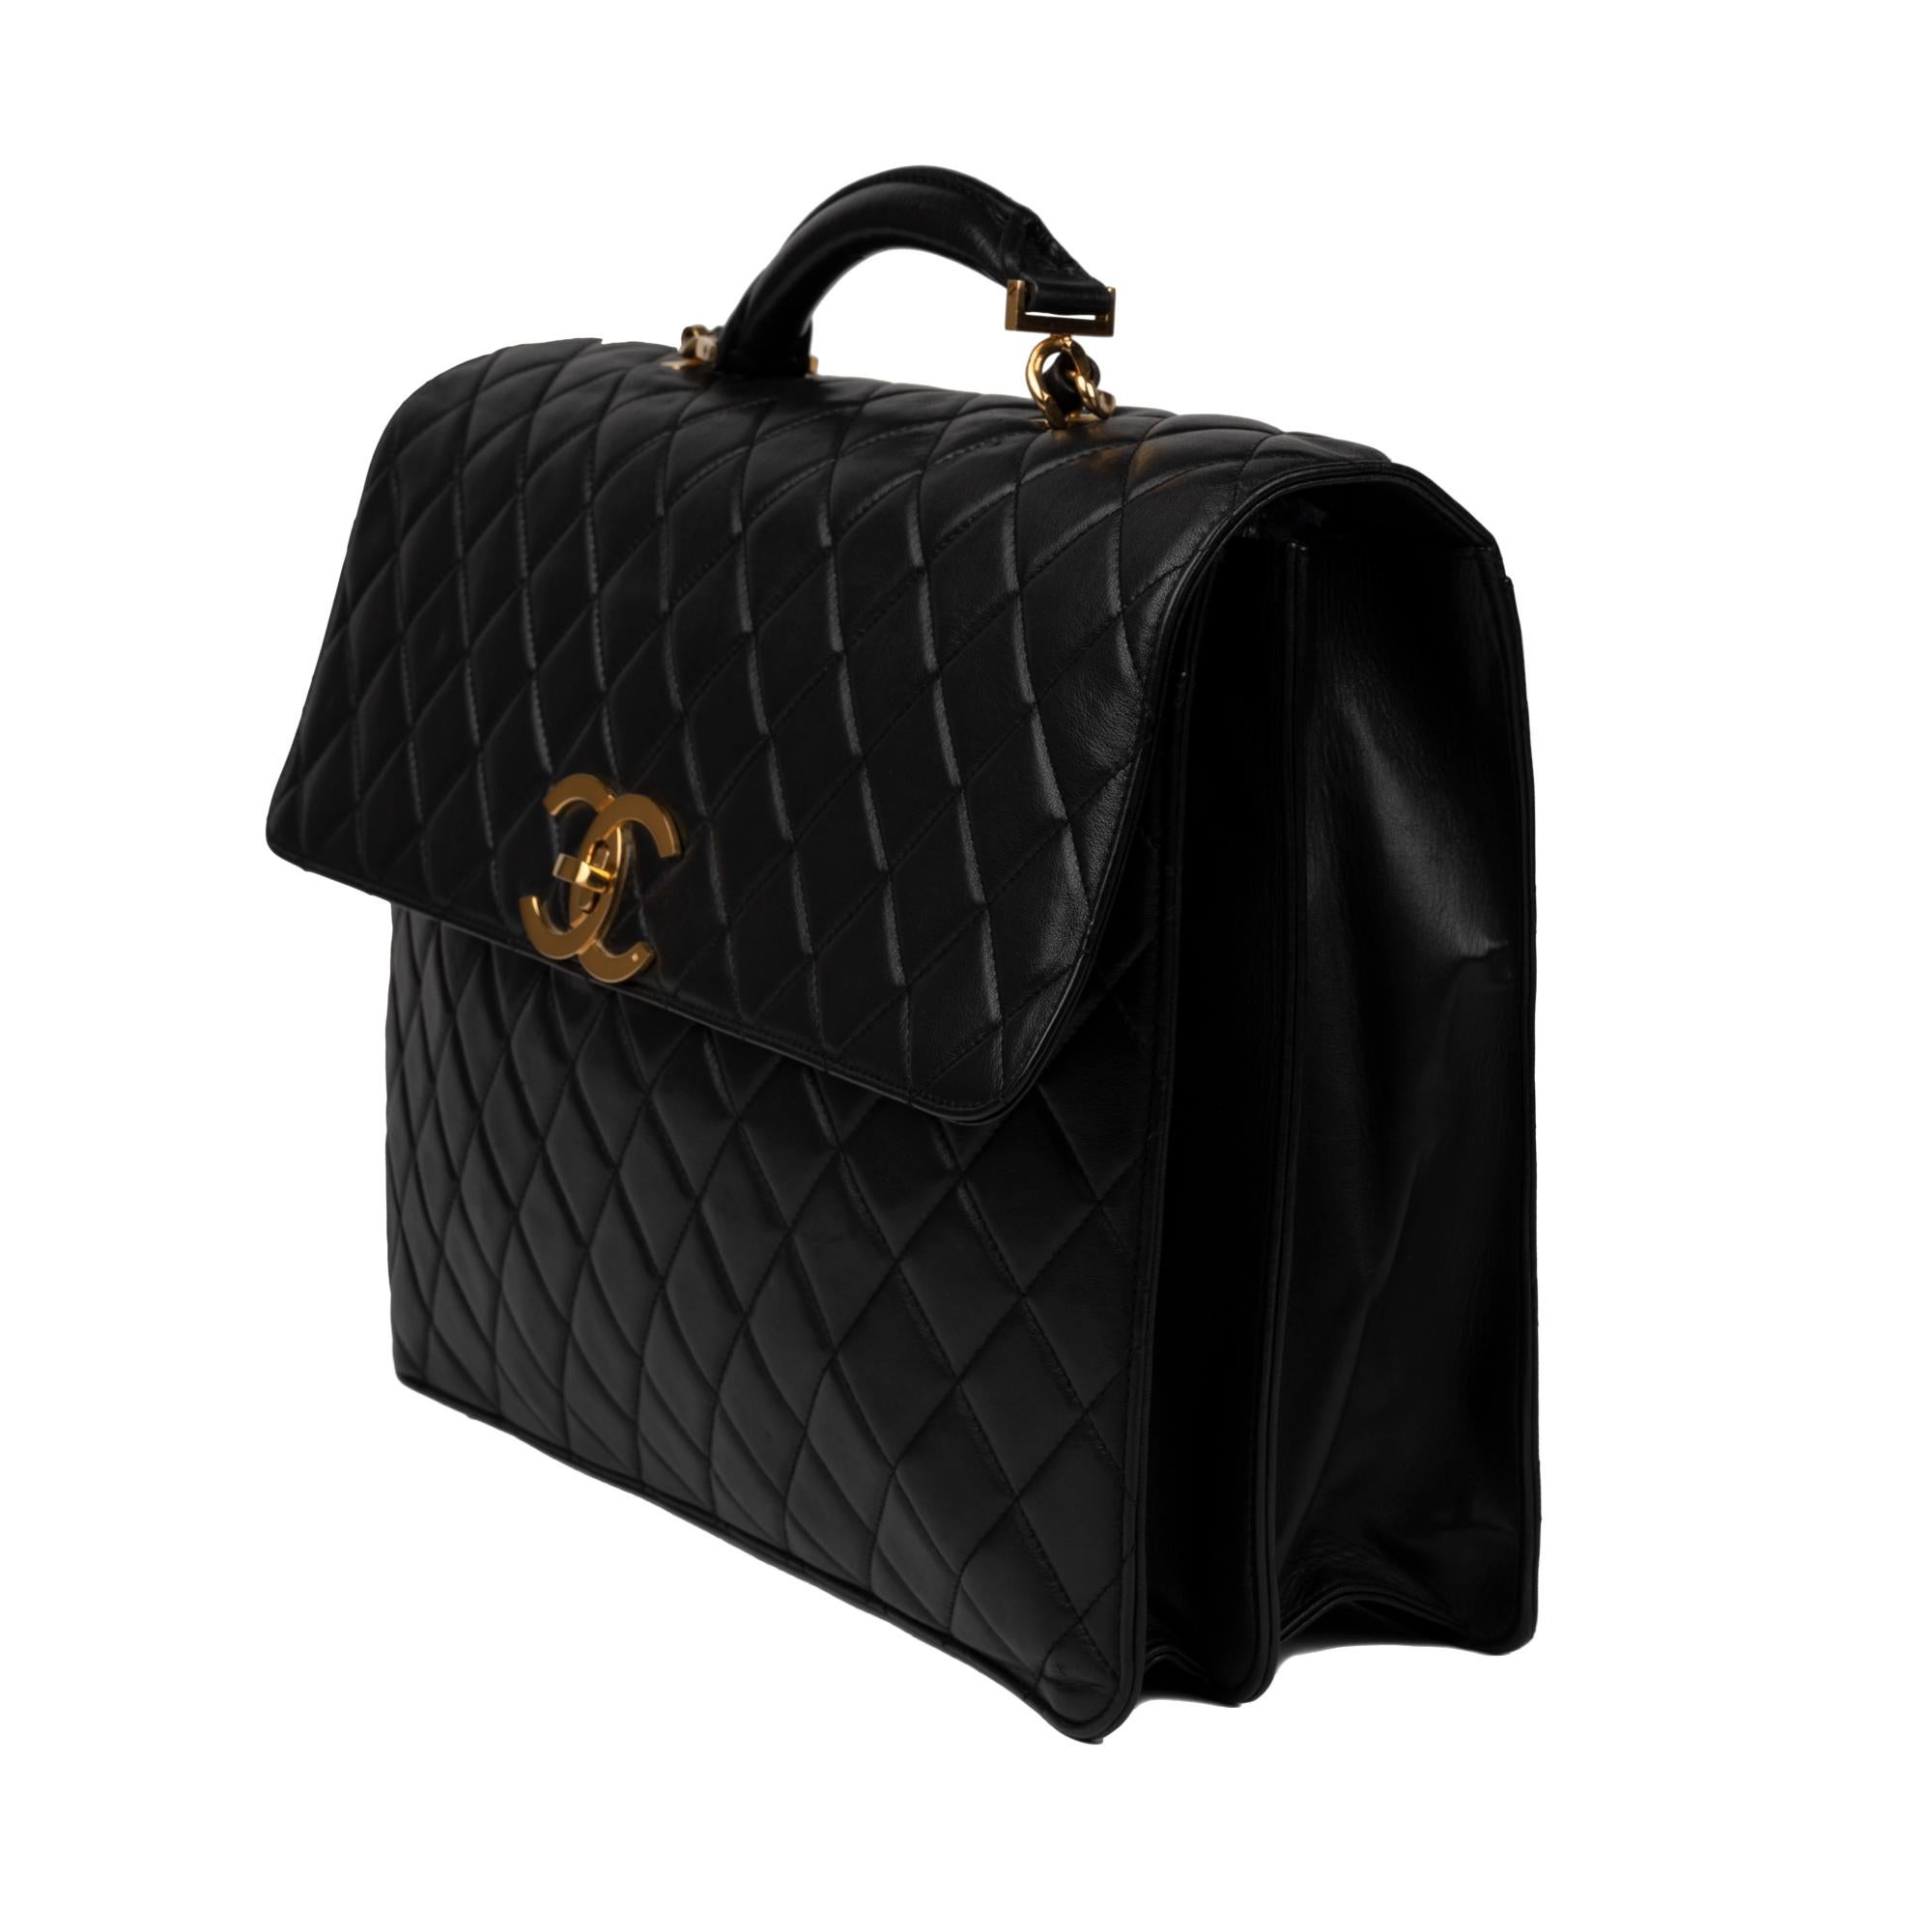 Chanel Black Lamb Skin Leather Briefcase 2